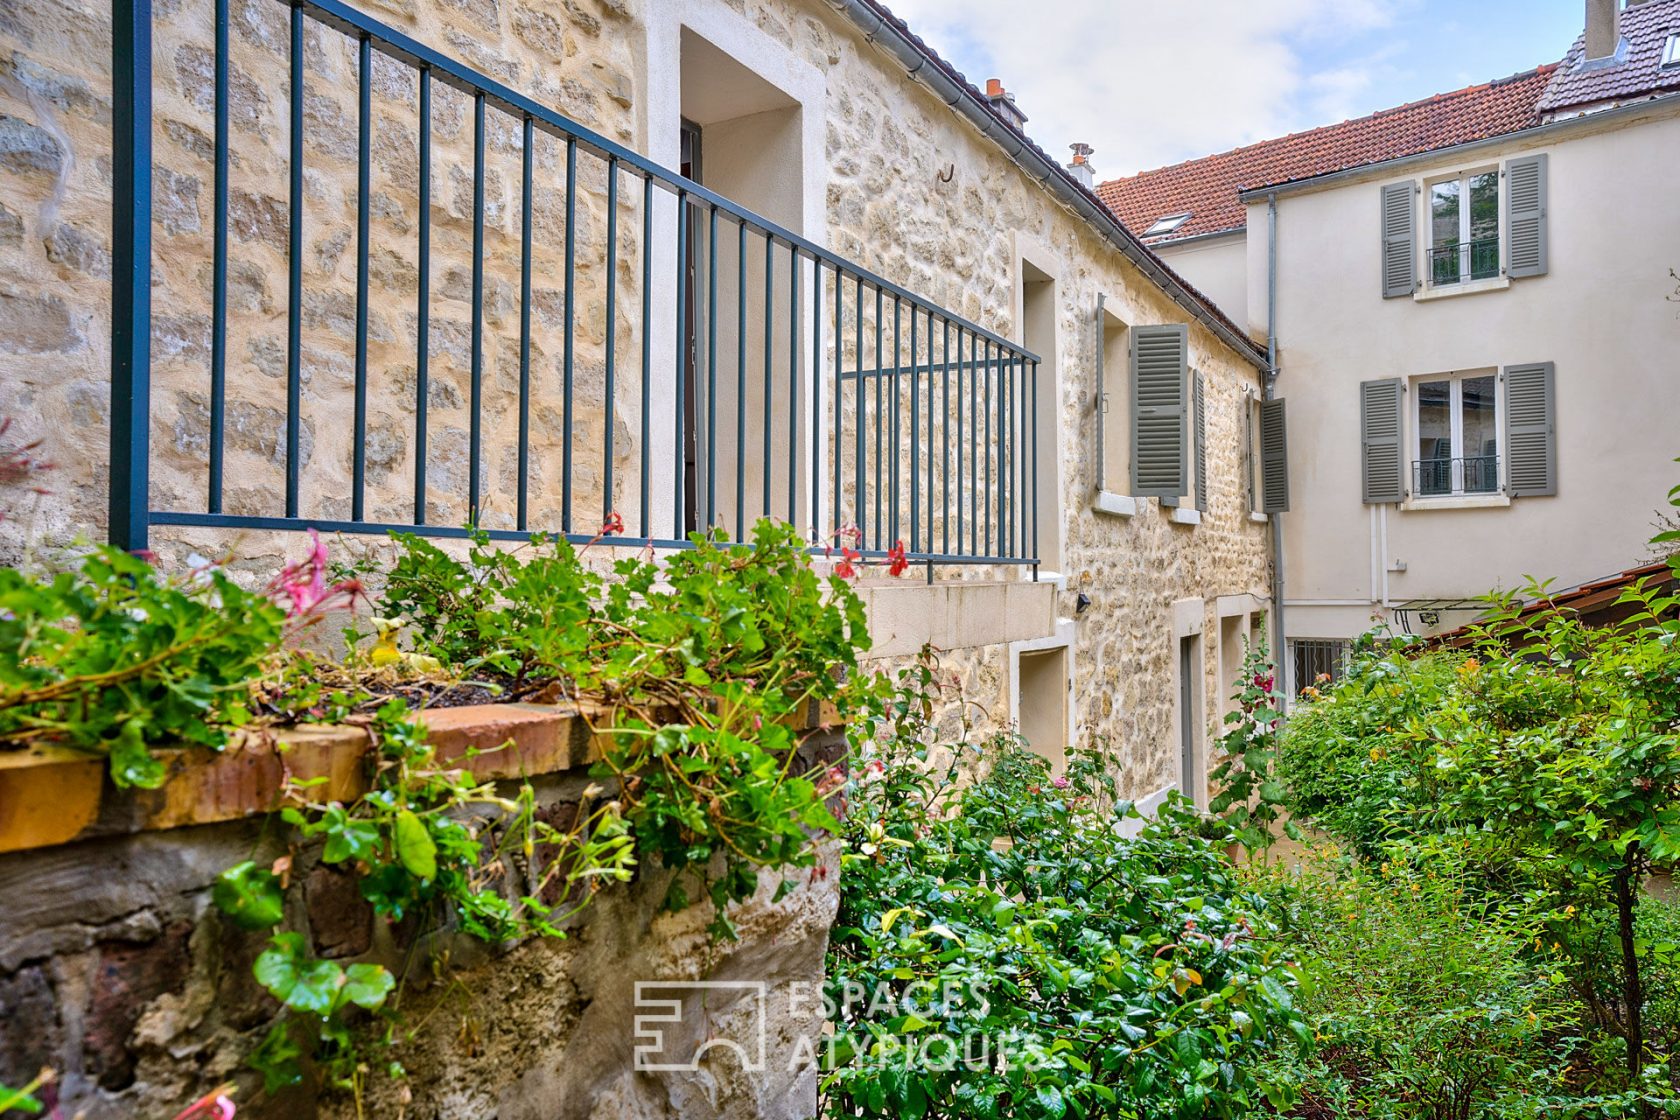 Townhouse with courtyard and hanging gardens St Wandrille